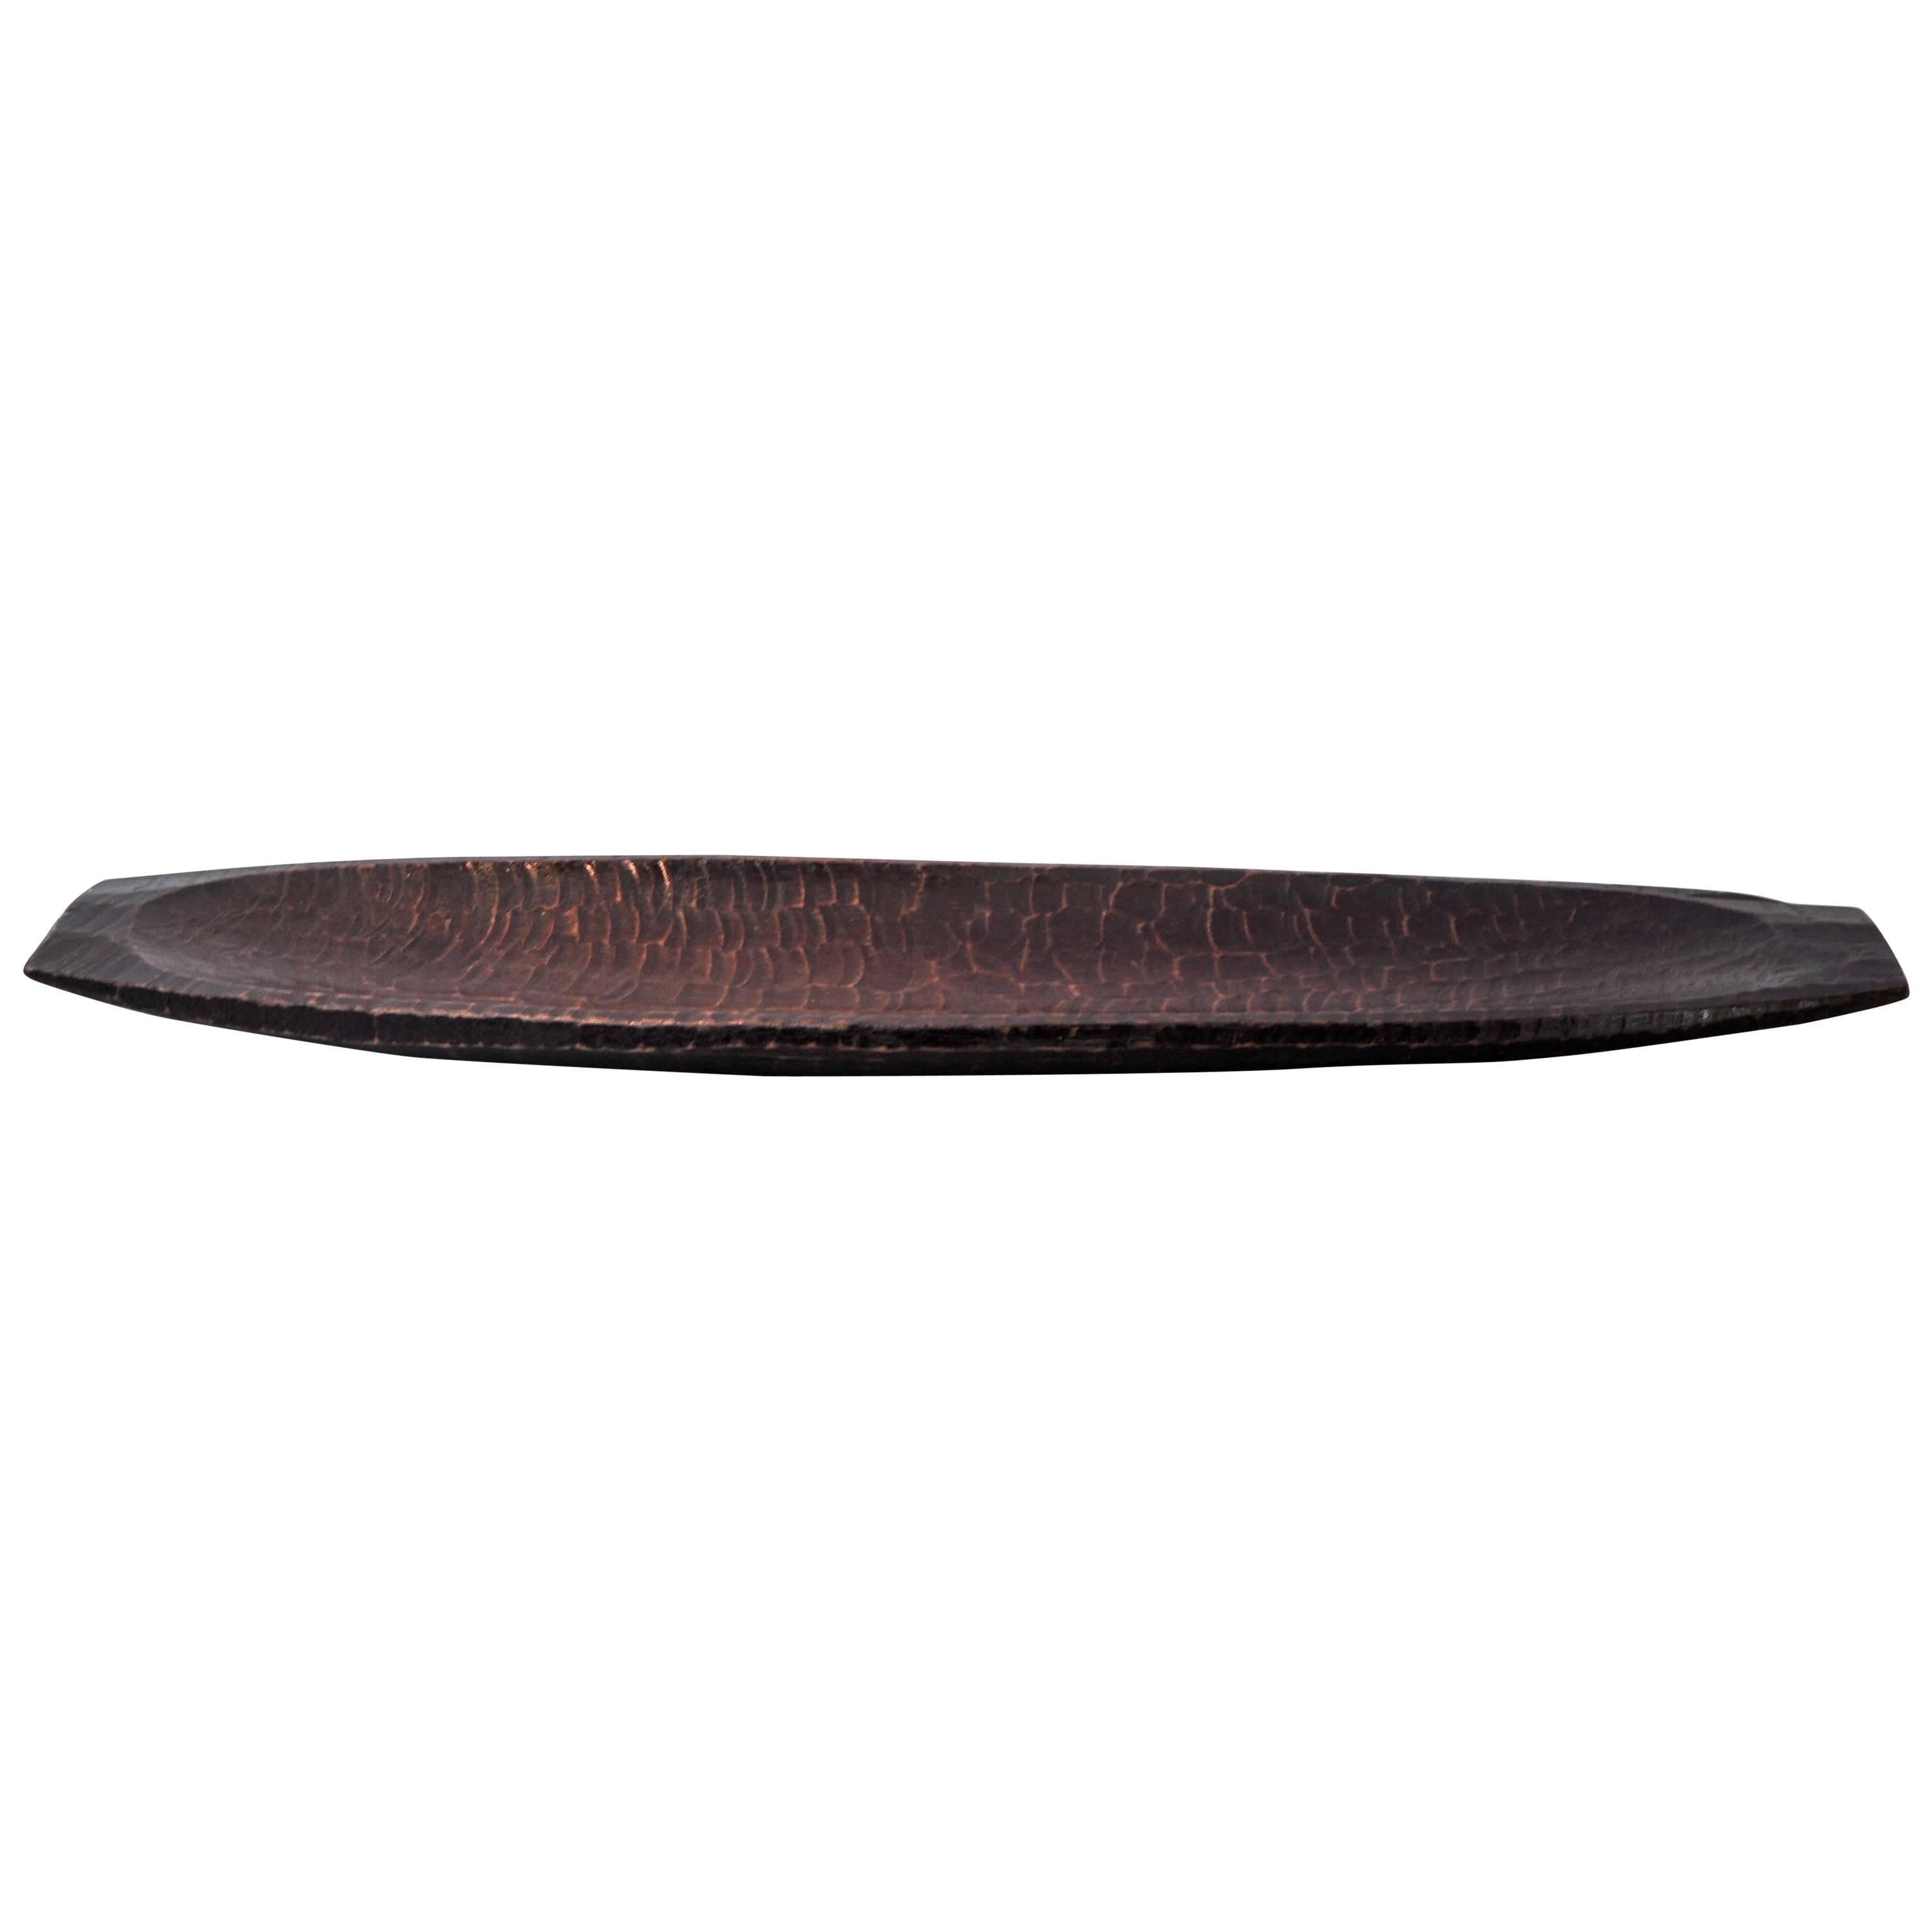 Tribal Hand Hewn Wooden Tray from the Mentawai Islands, Mid-Late 20th Century.